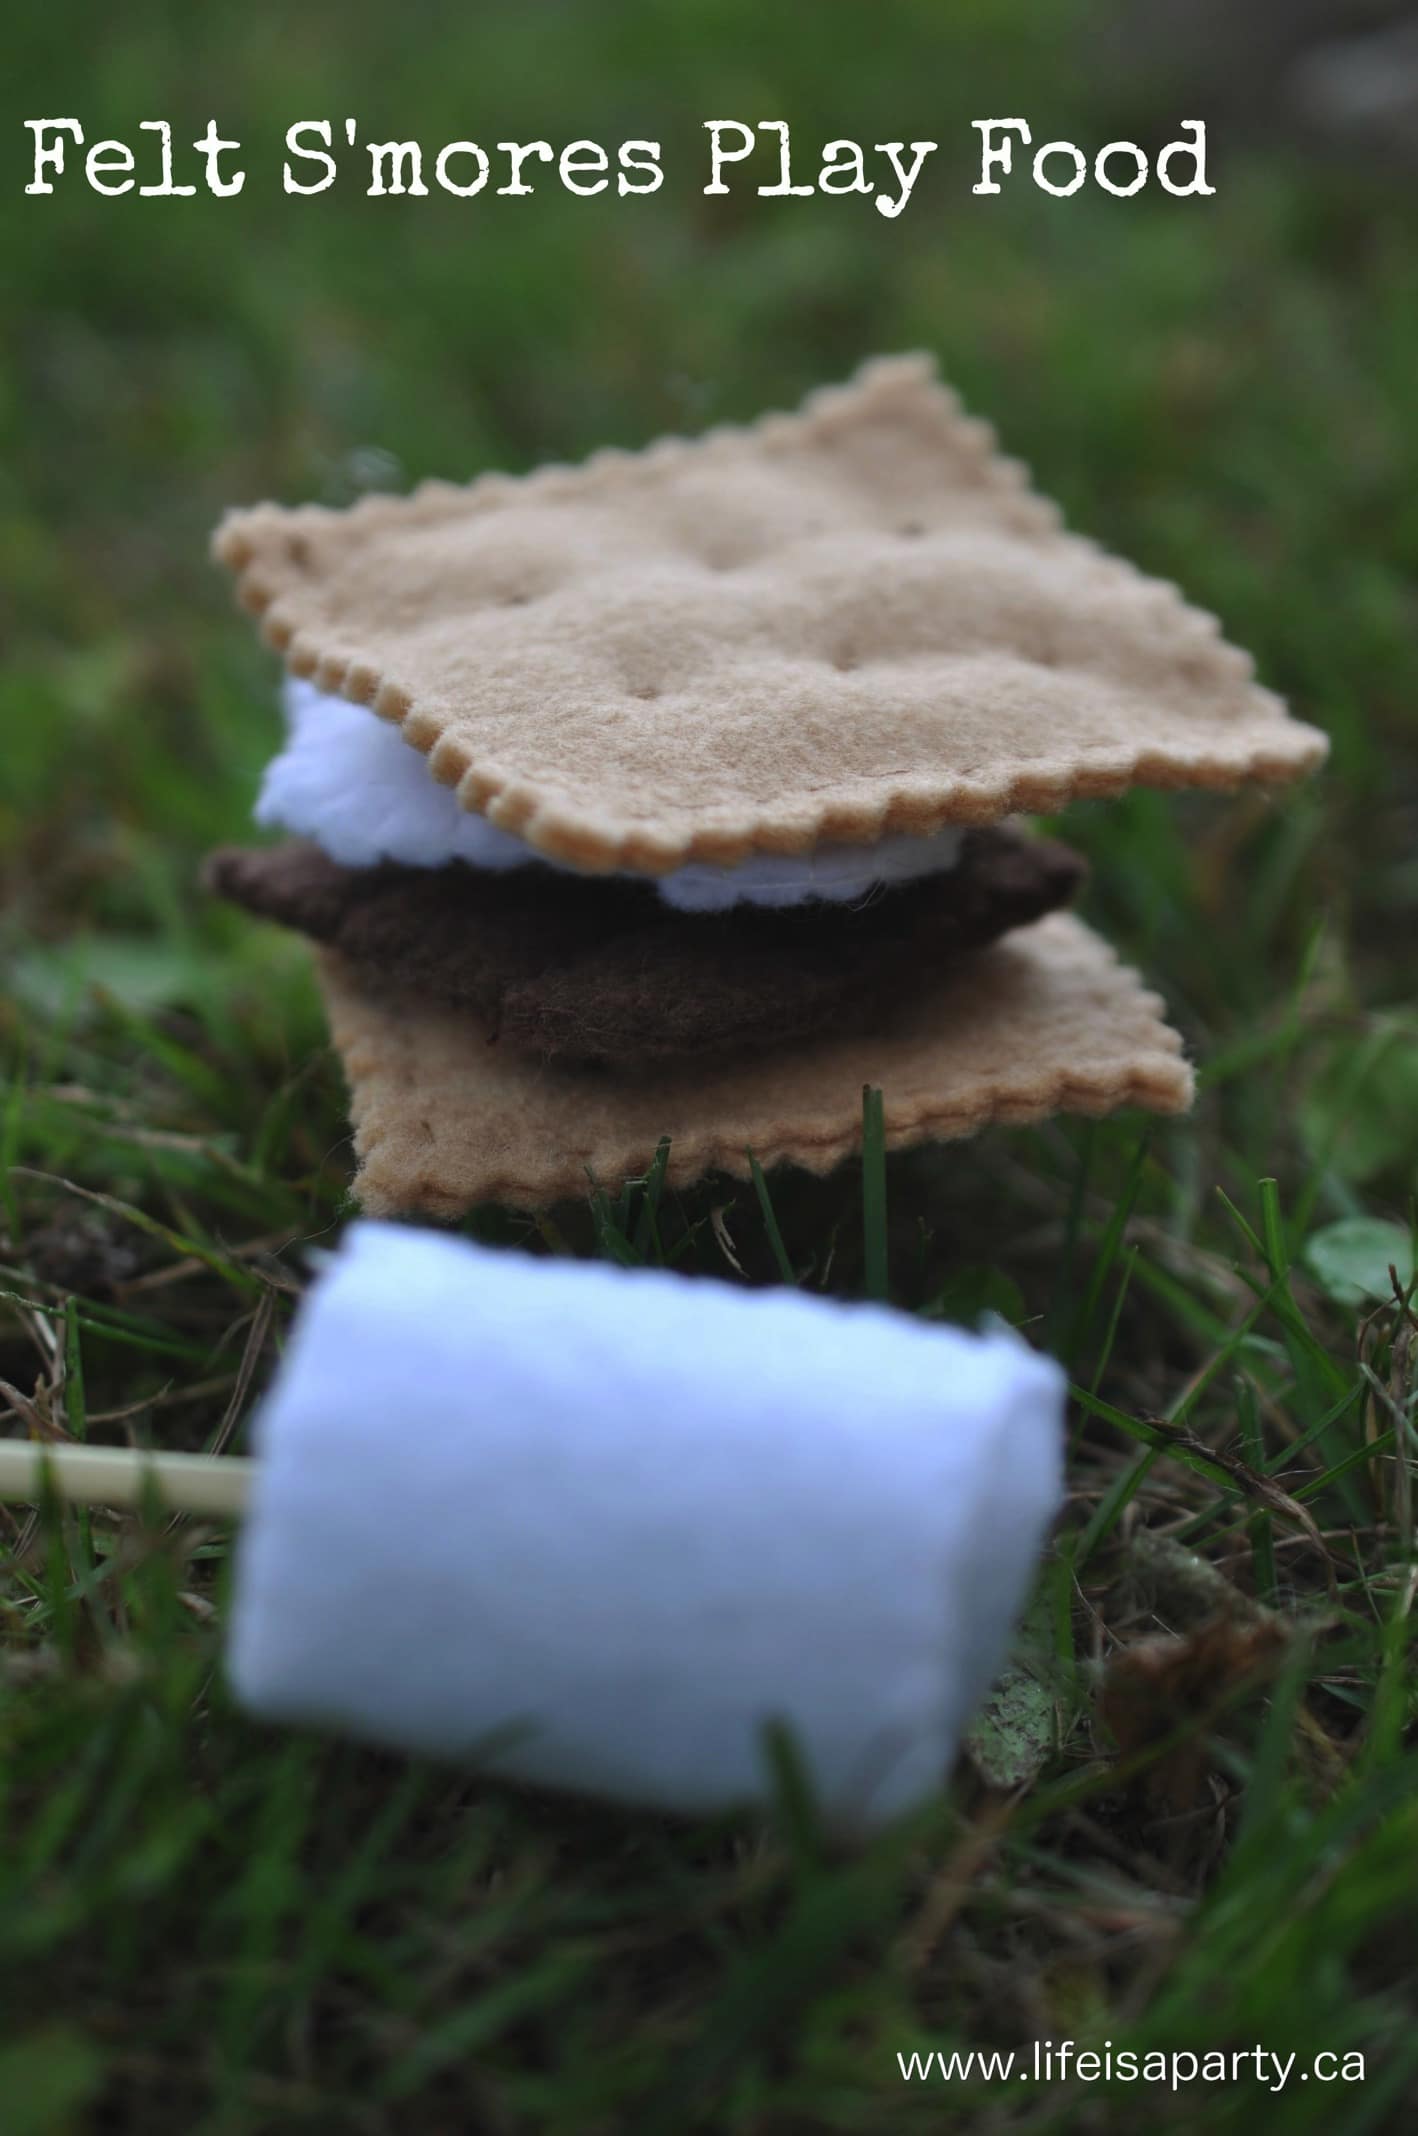 Felt Smores Play Food: these easy homemade toy DIY felt smores for children to use as play food are simple to put together and adorable for dramatic play.